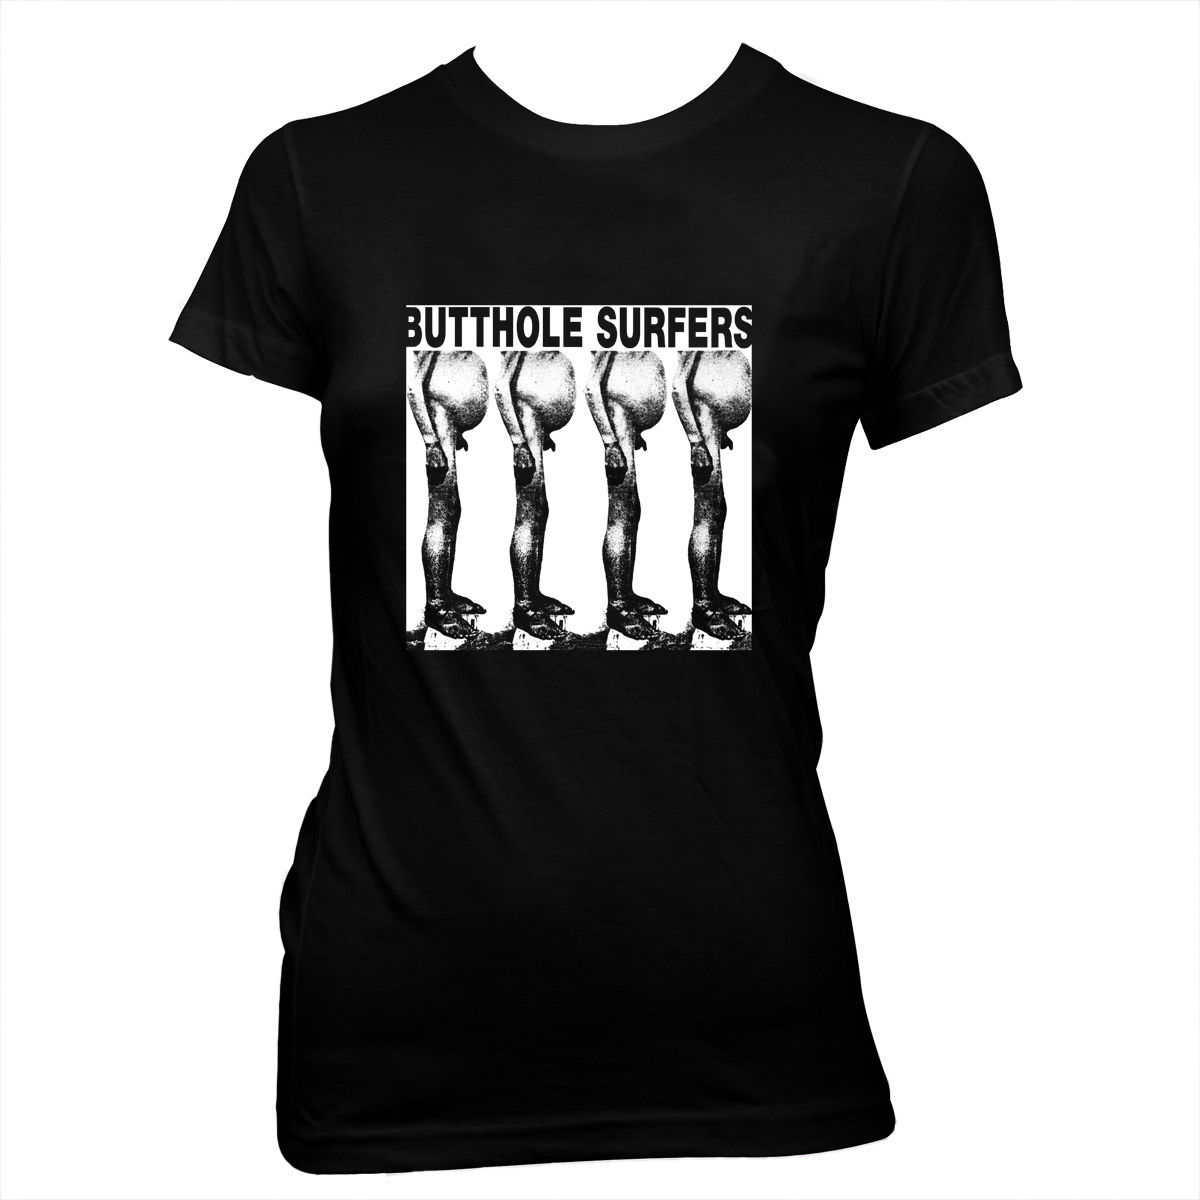 Butthole Surfers - Gibby Haynes - Women's 100% cotton babydoll t-shirt